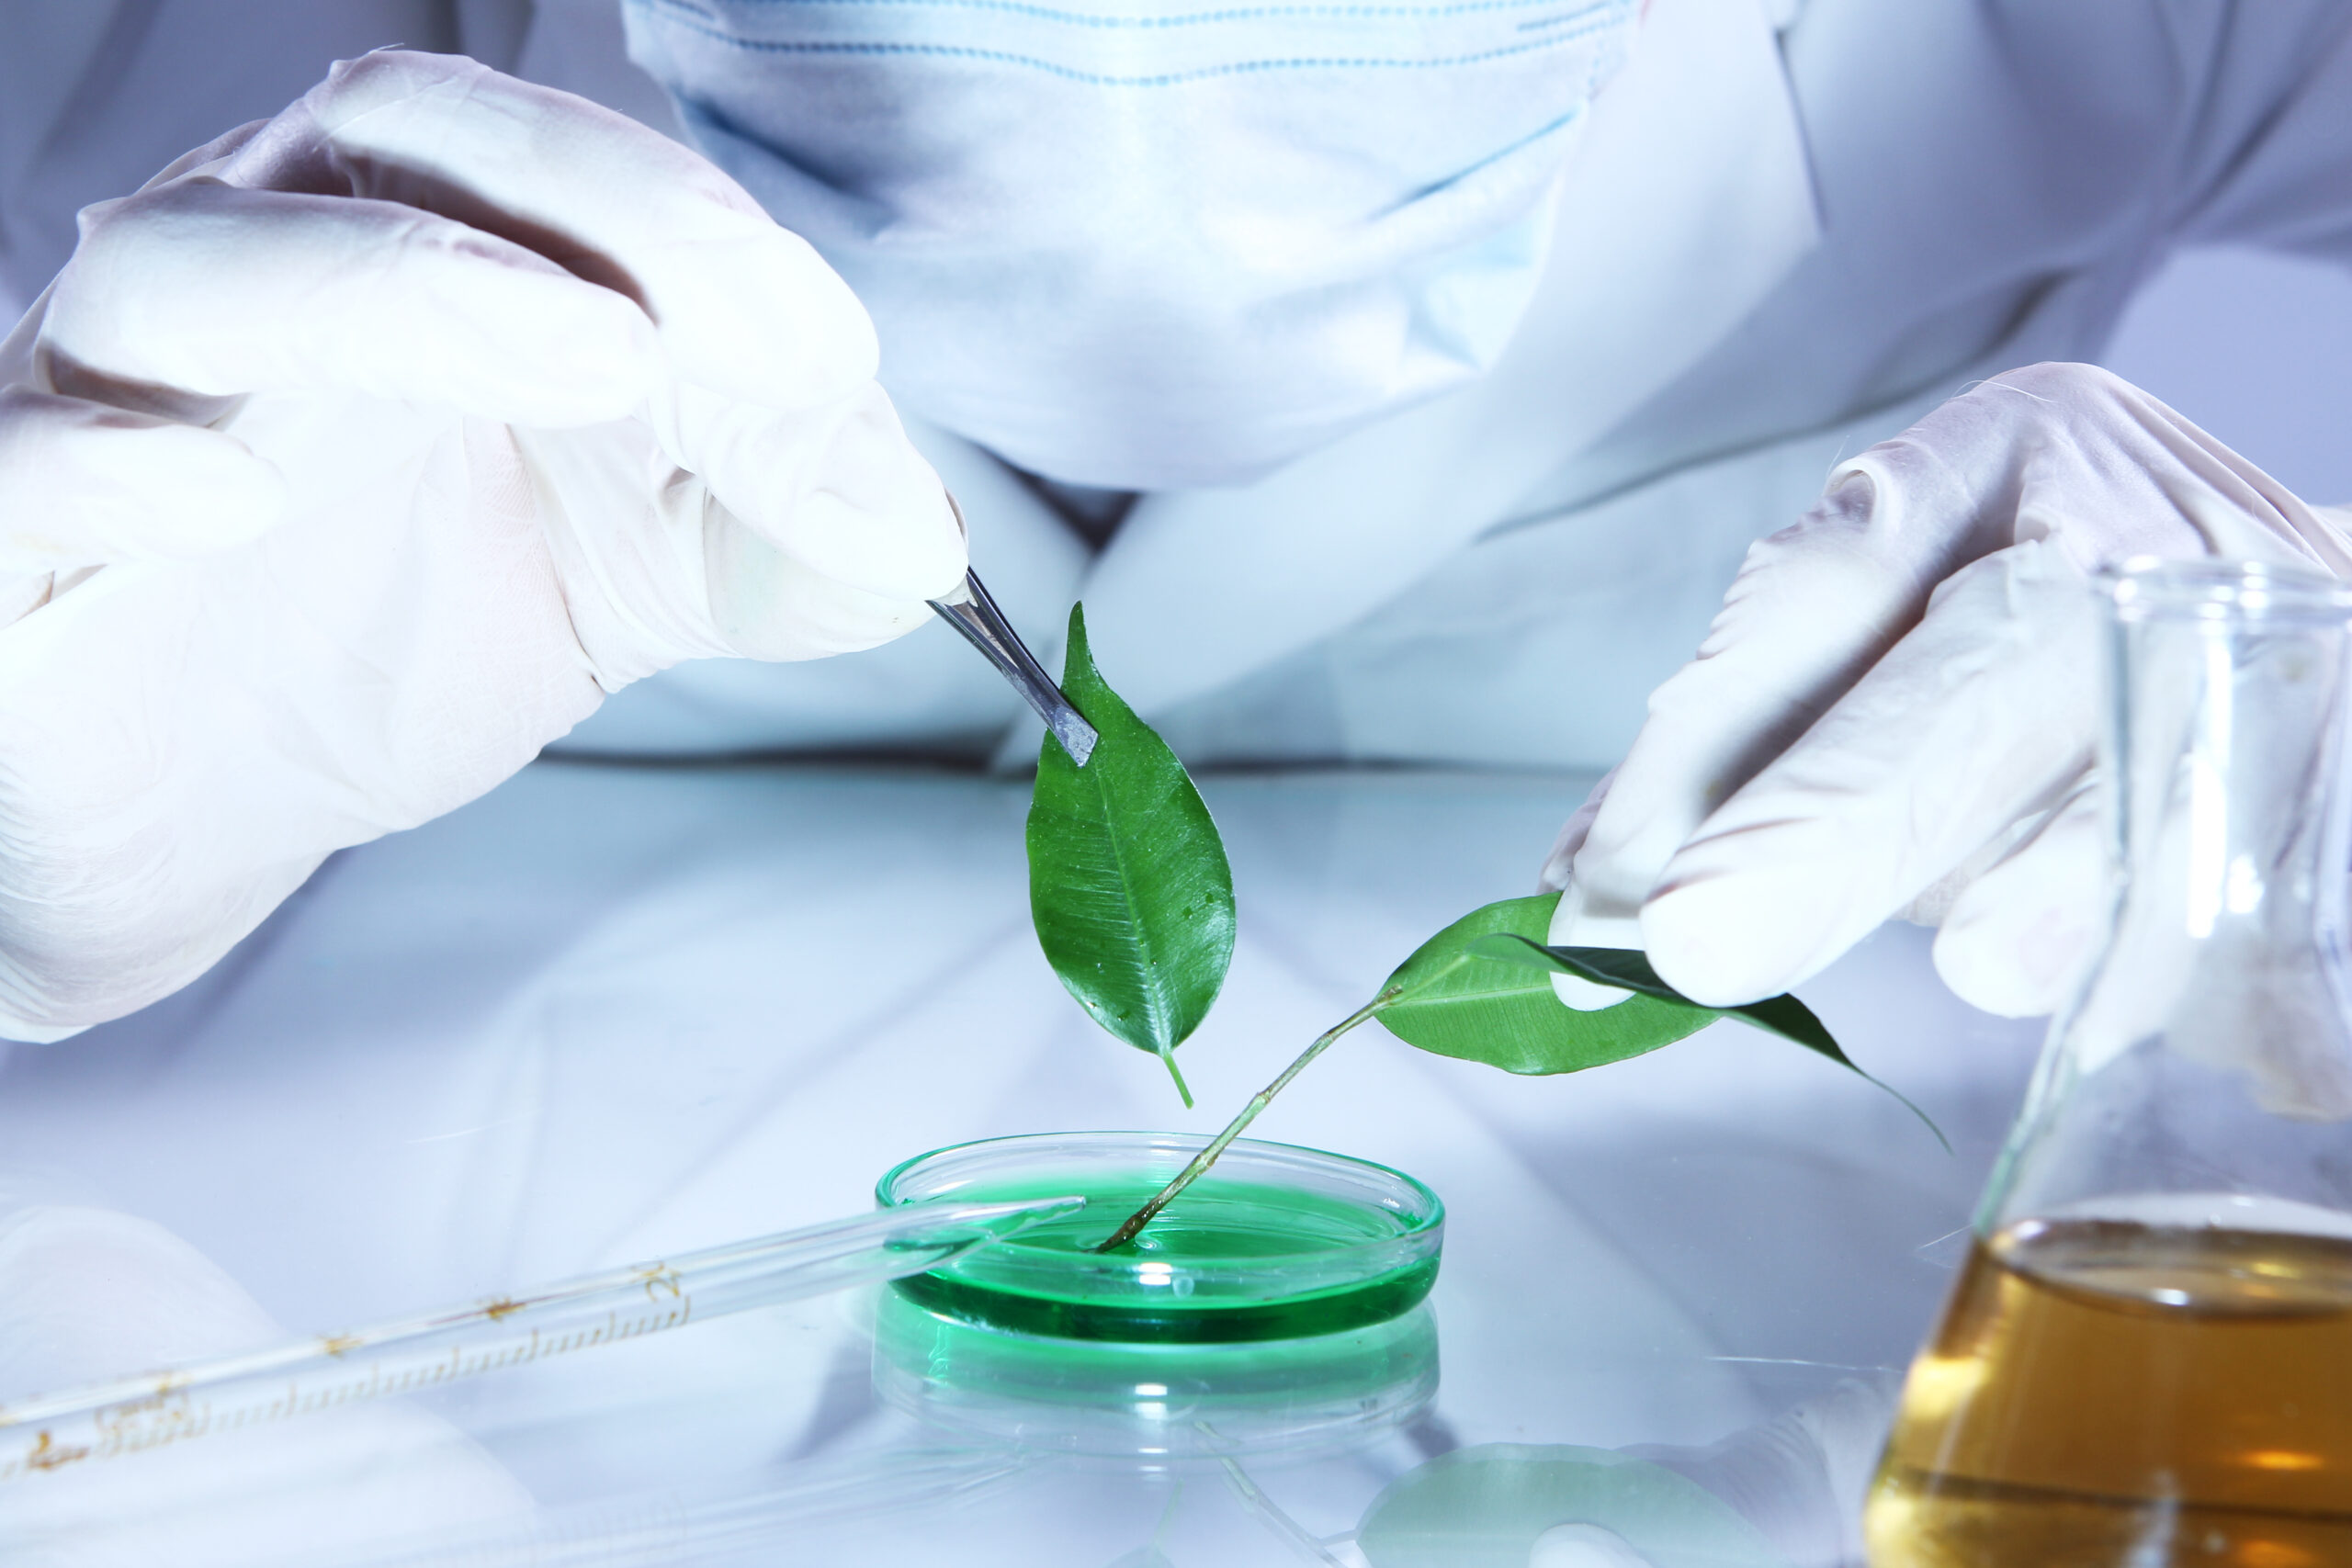 scientist examining leaf in Petri dish - benefits of green beauty products concept